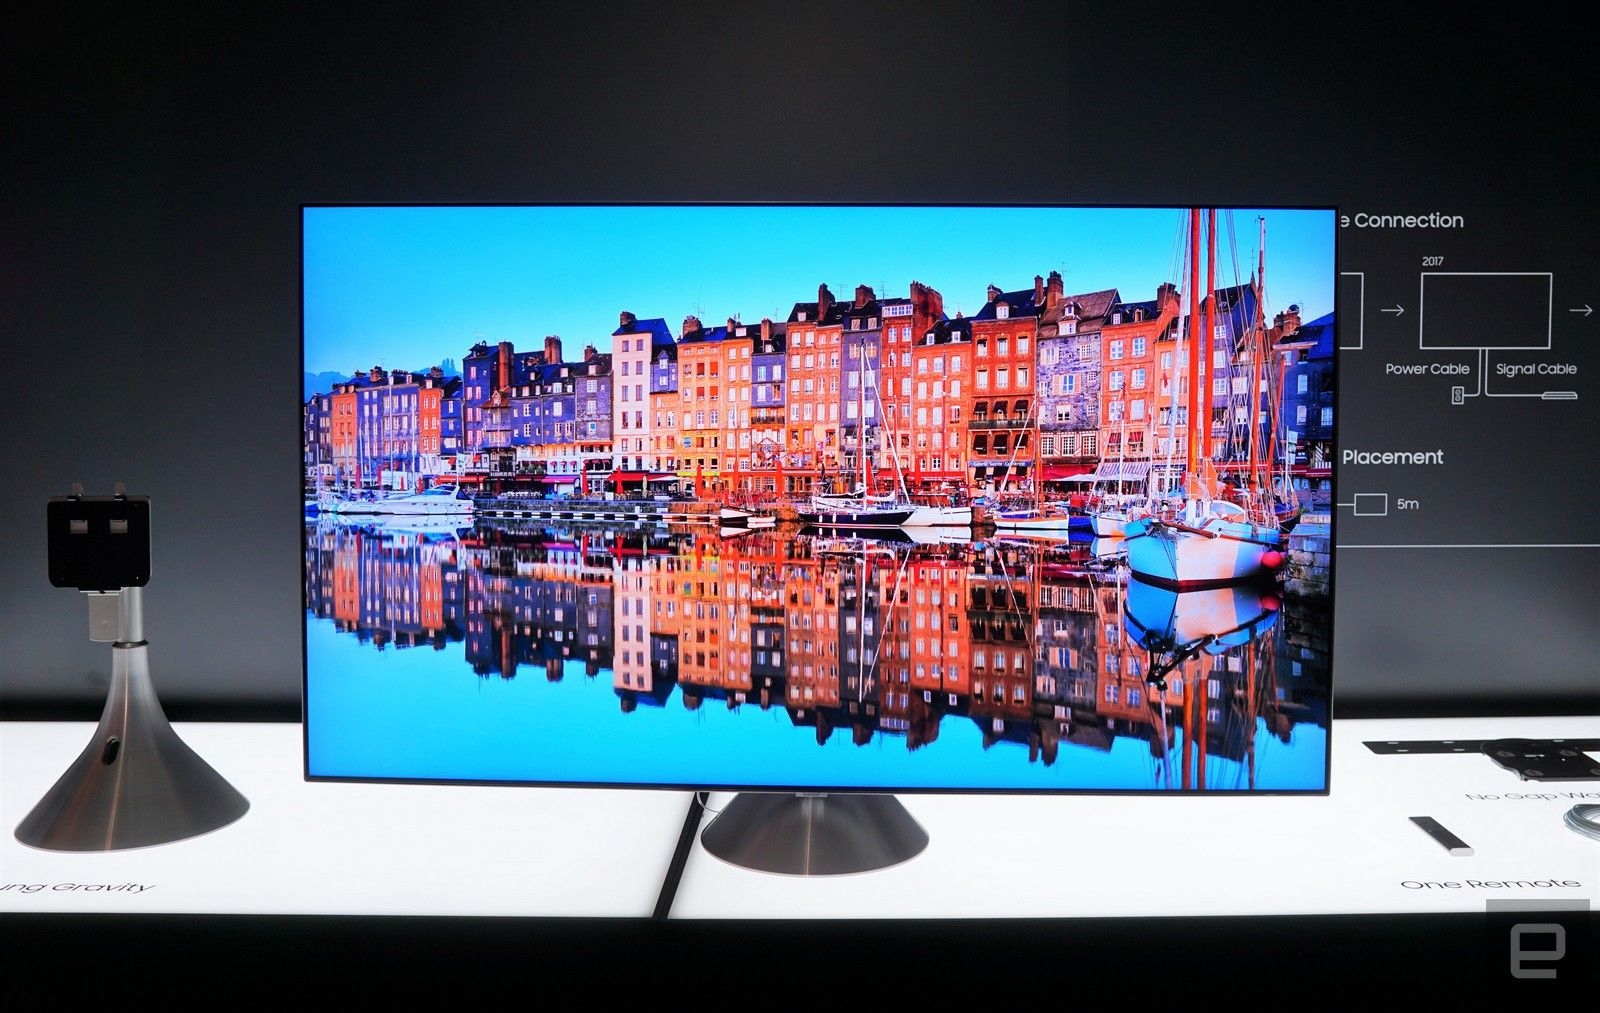 Samsung adds FreeSync to its latest TVs for smoother gaming | DeviceDaily.com